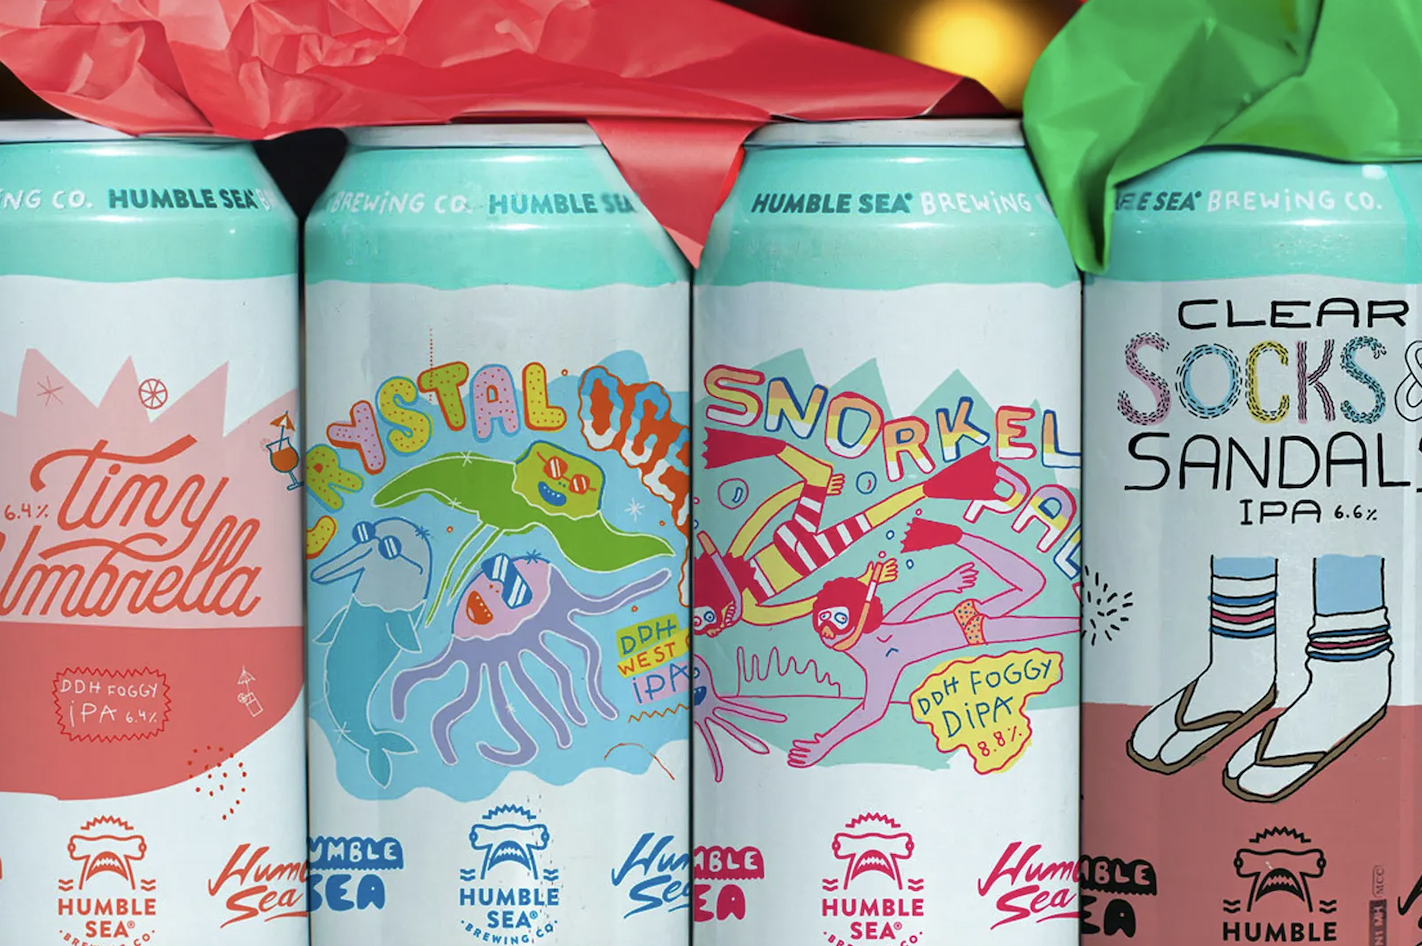 four tall boys of beer with festive packaging